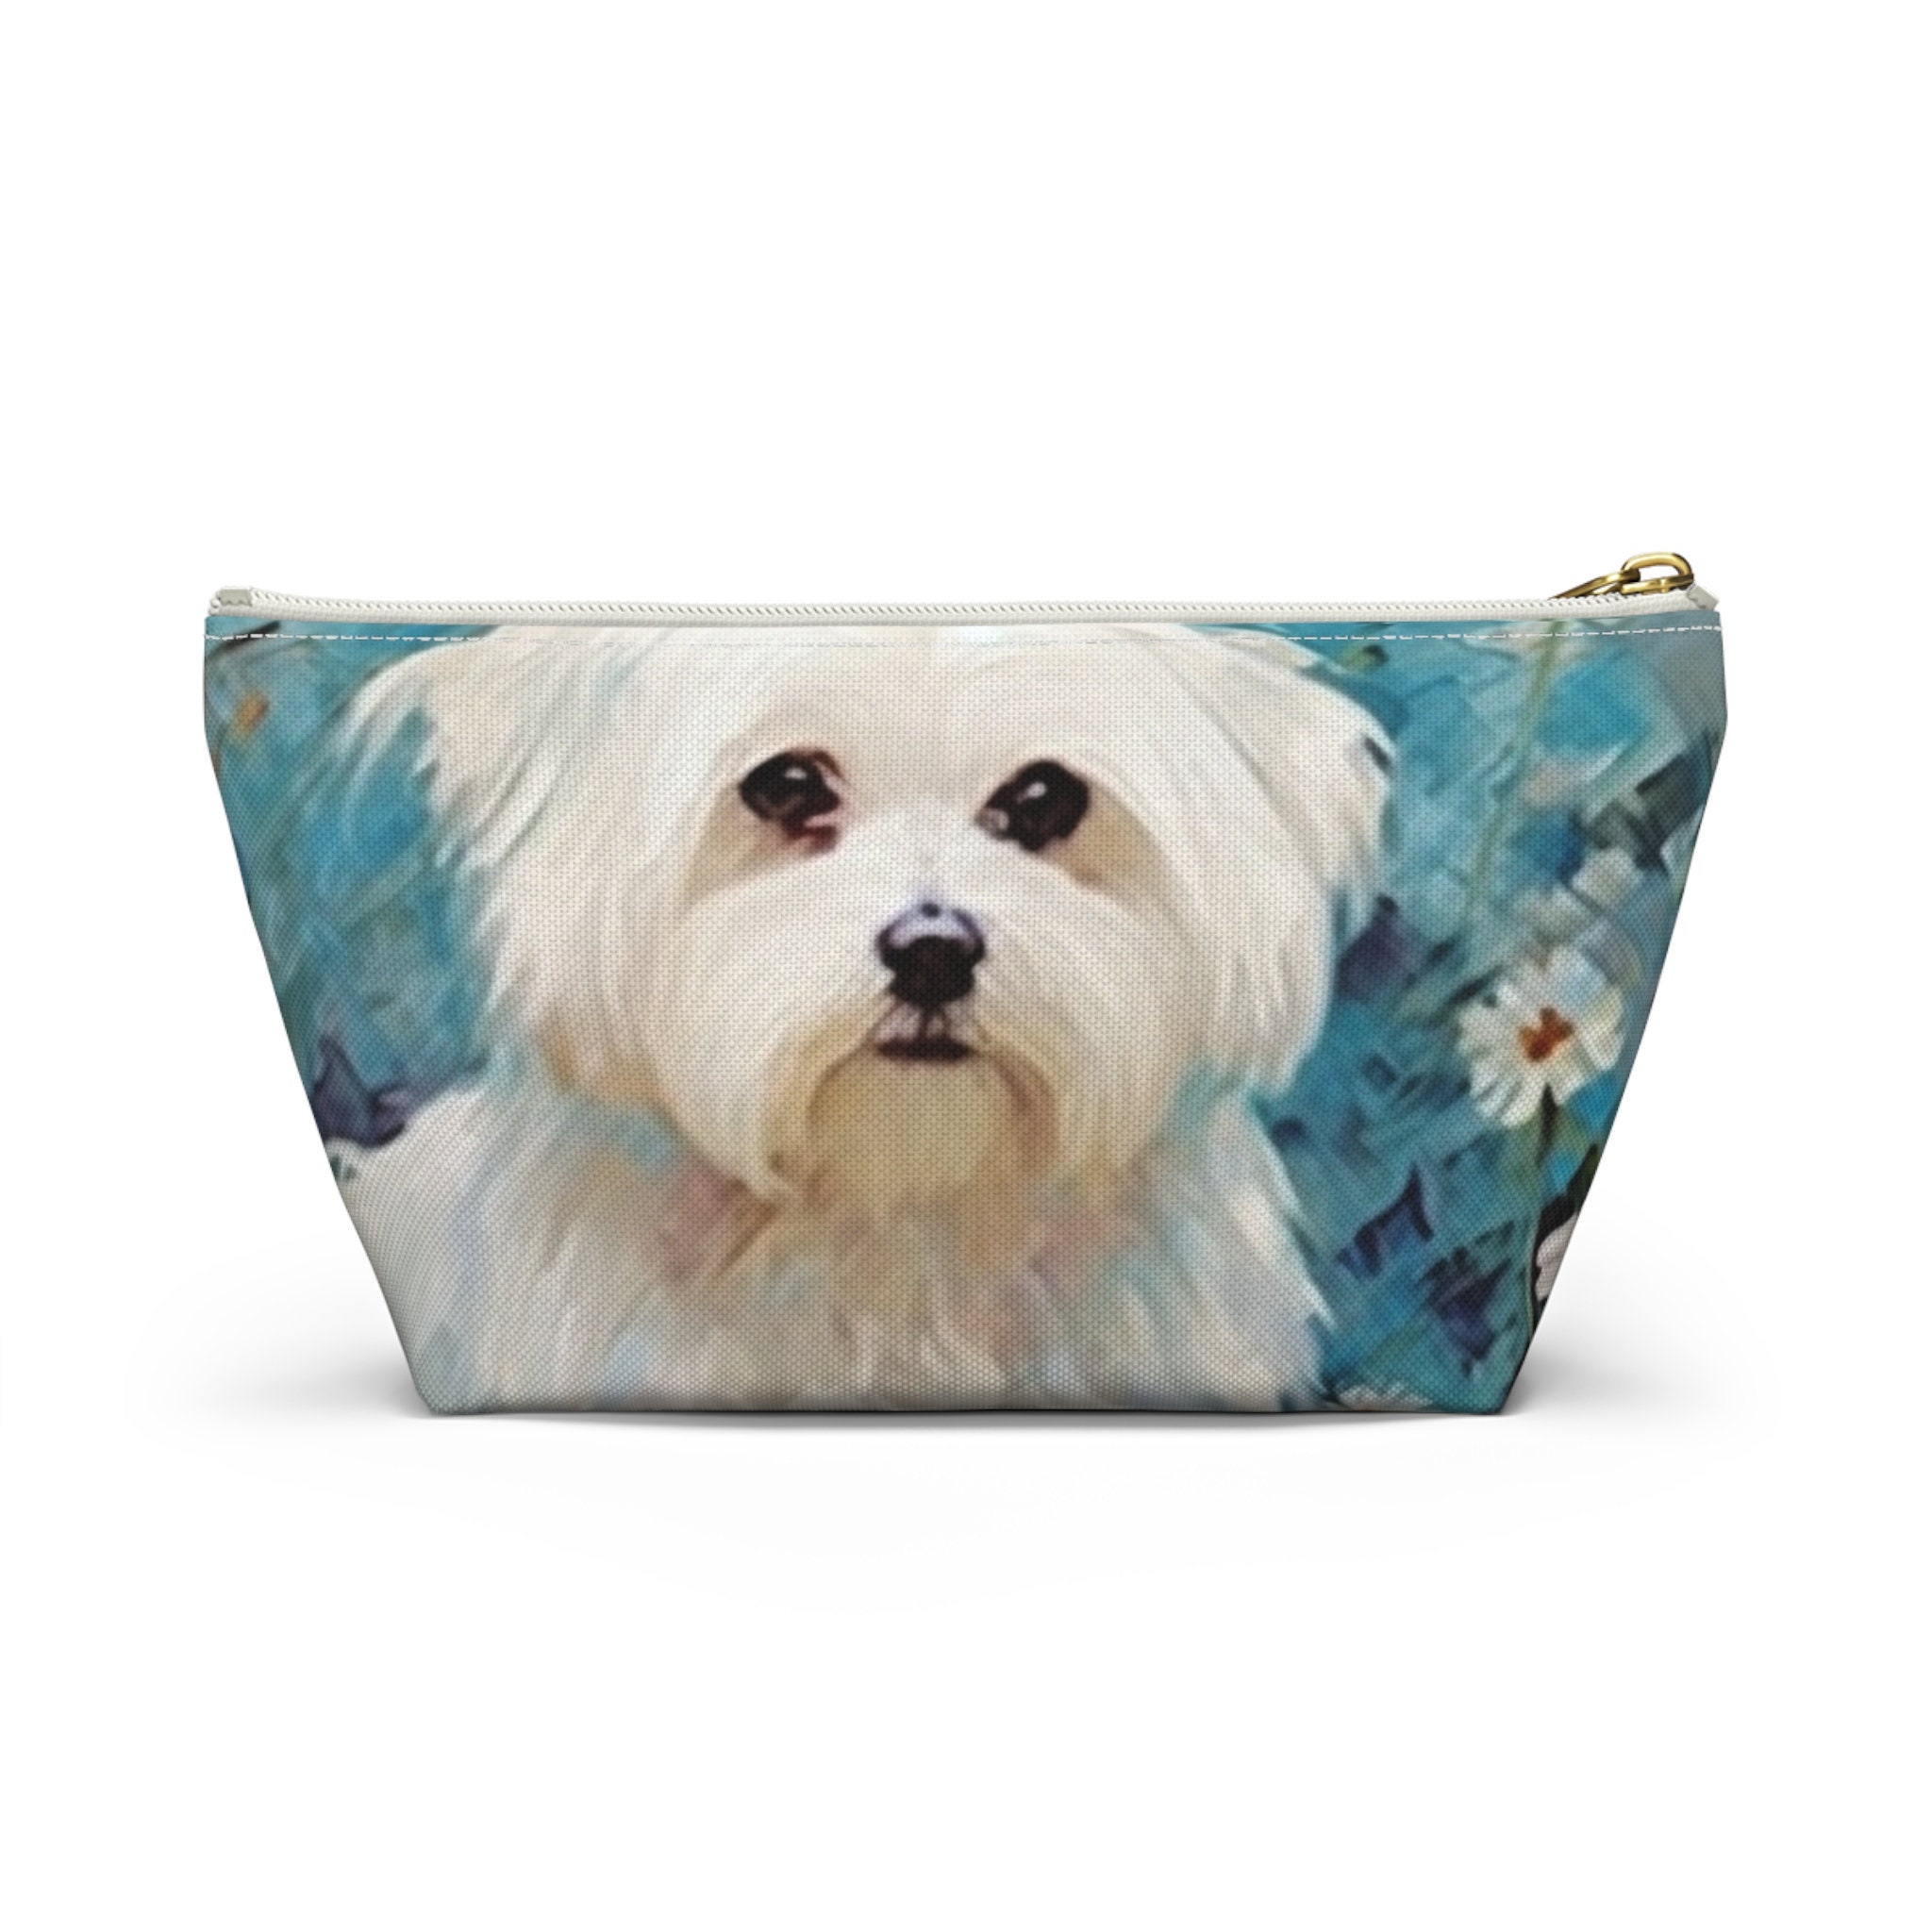 3 Baxter Dog Carrier. I want this for my Maltese!